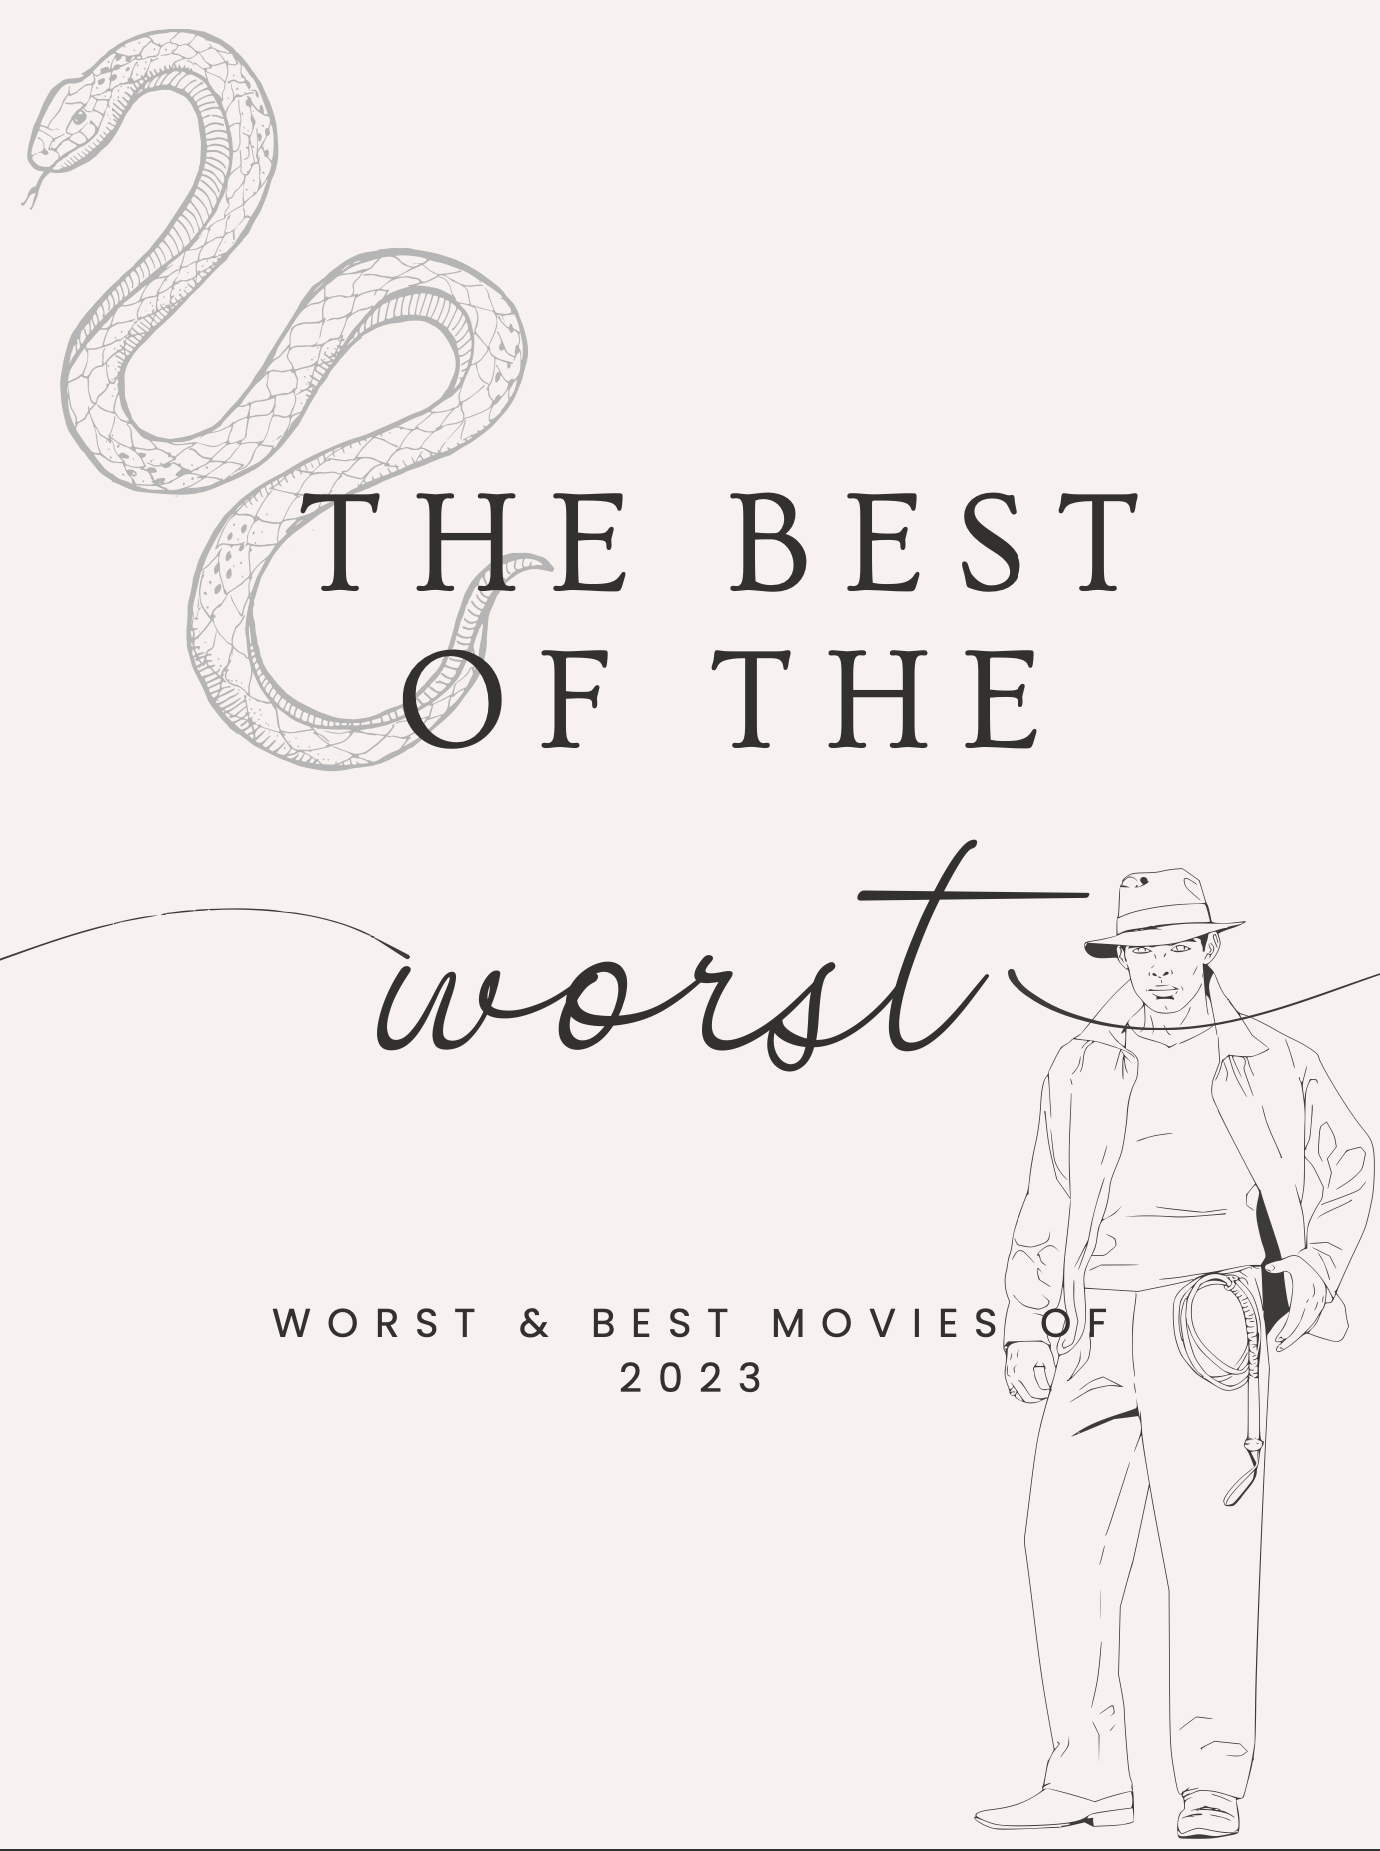 The best of the worst: worst and best movies of 2023